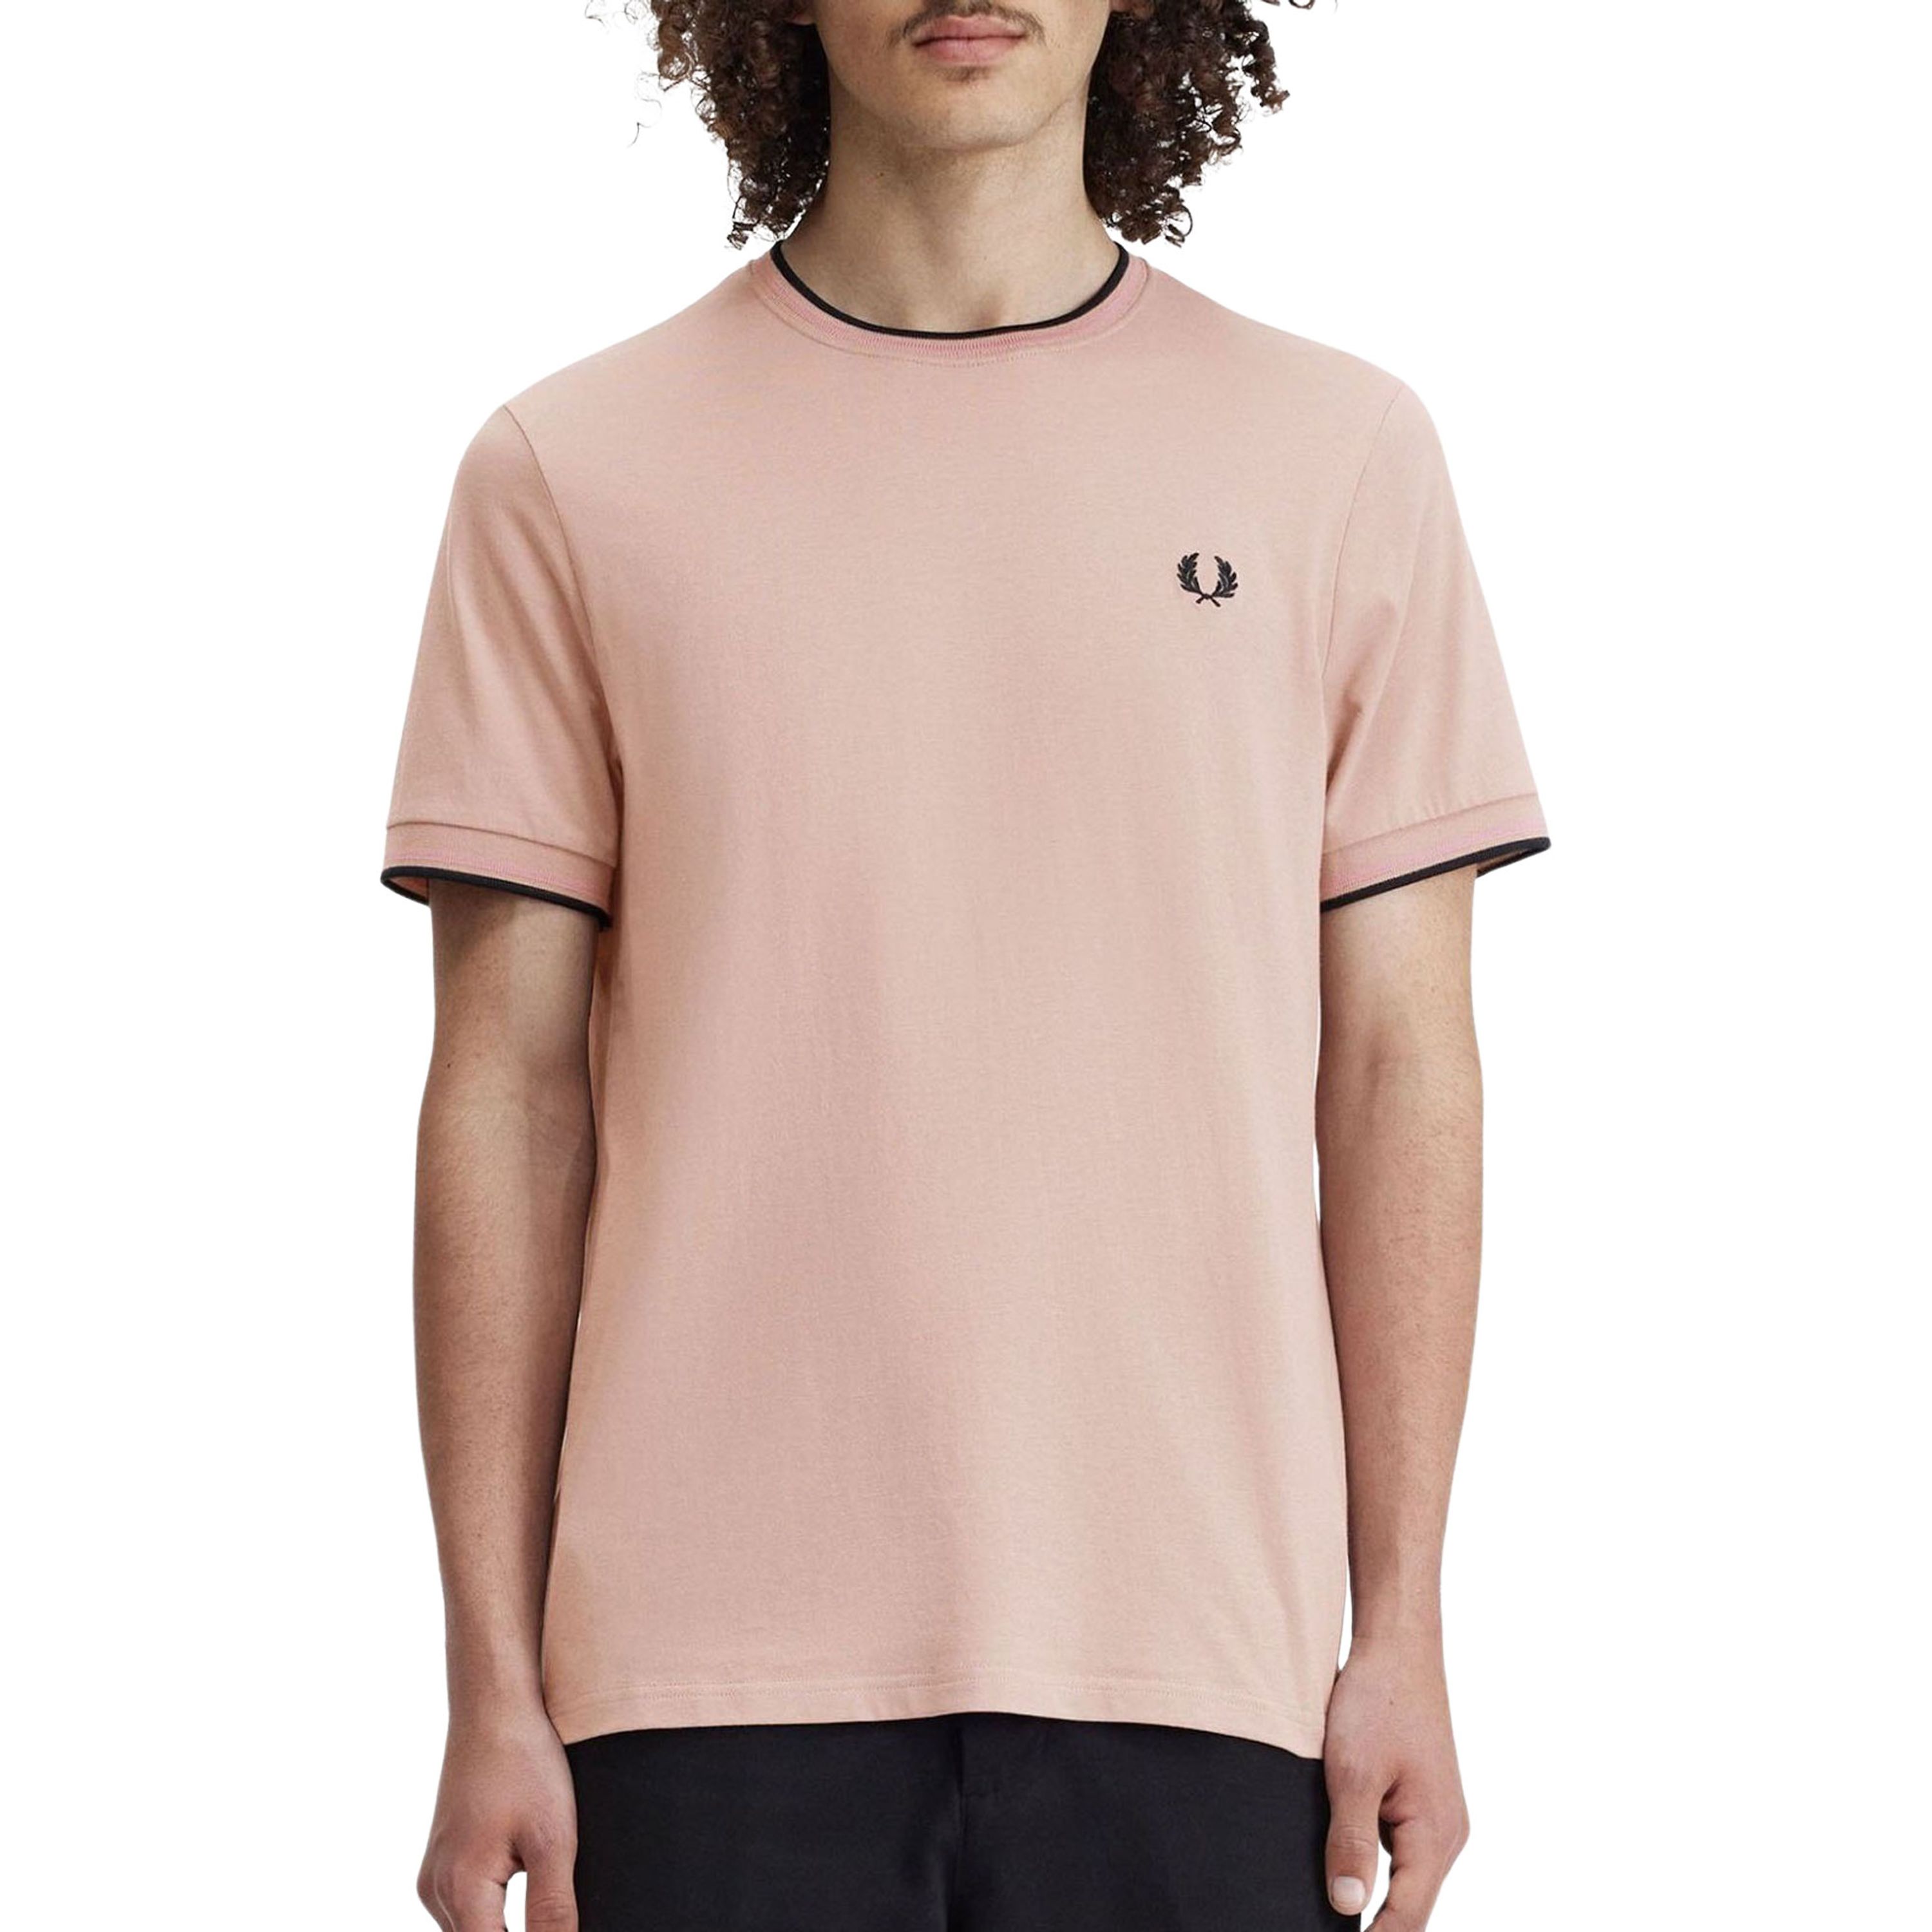 T-shirt fred perry twin tipped homme